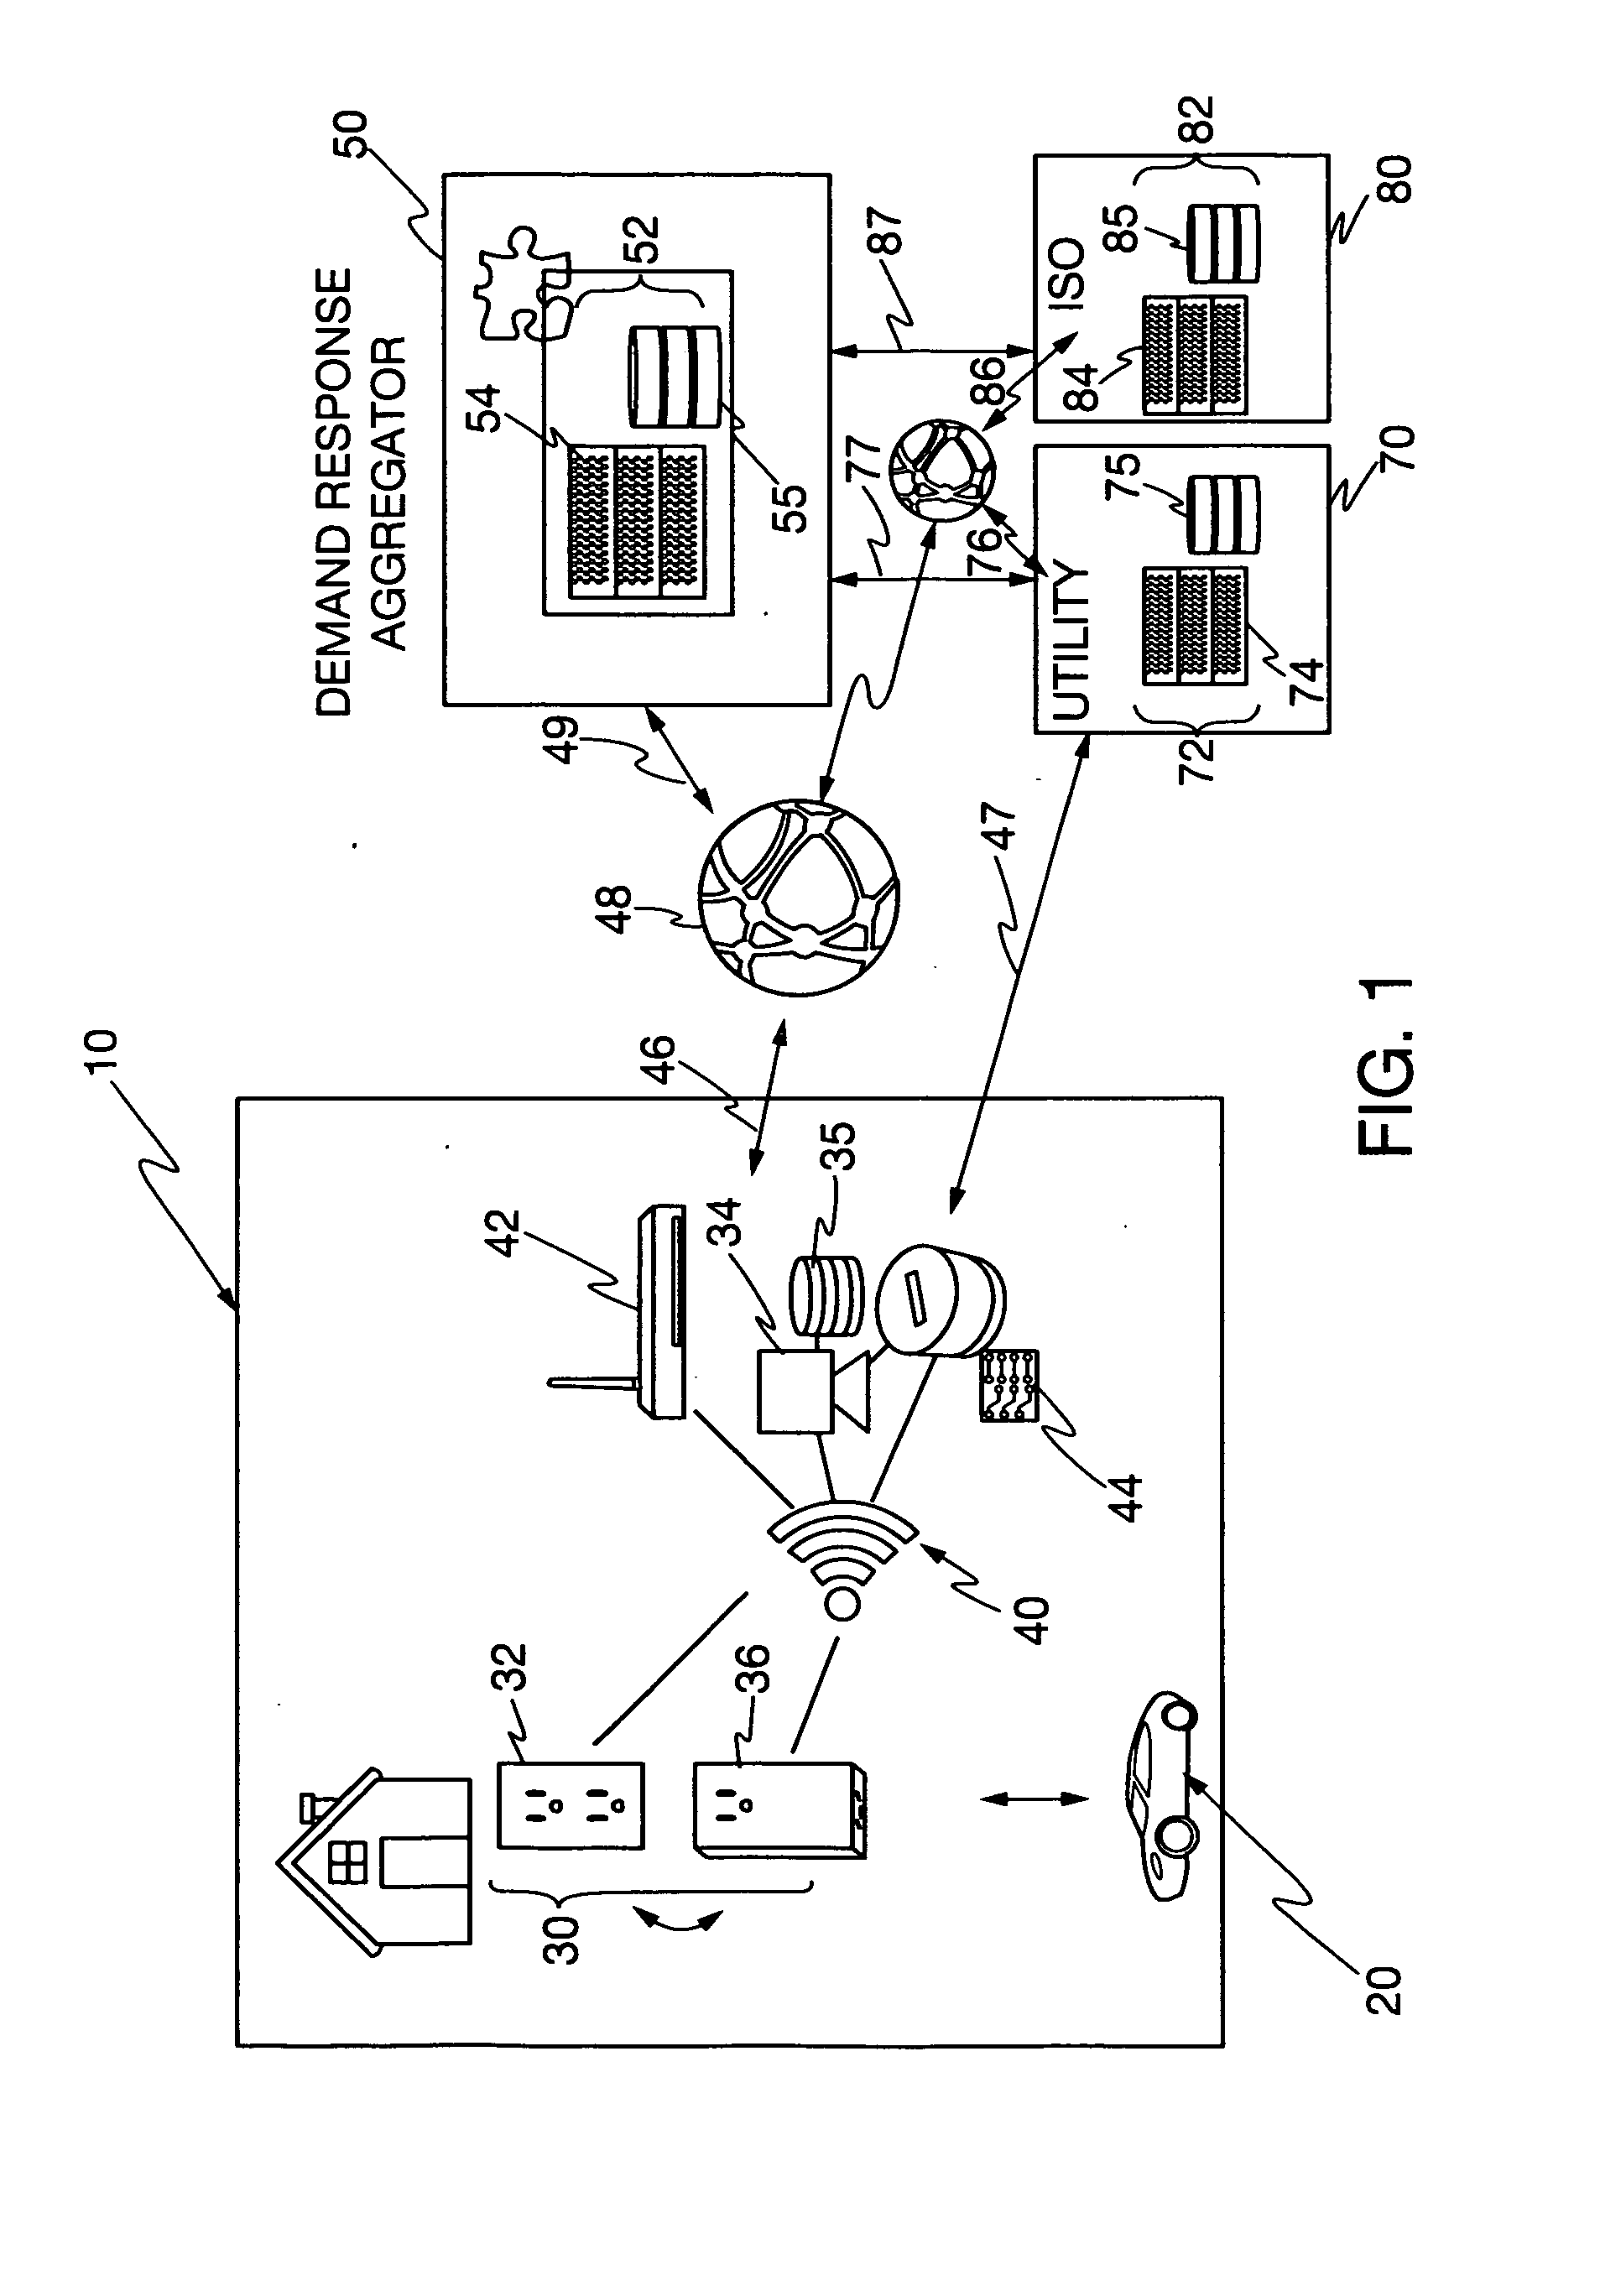 Apparatus and method for controlling consumer electric power consumption